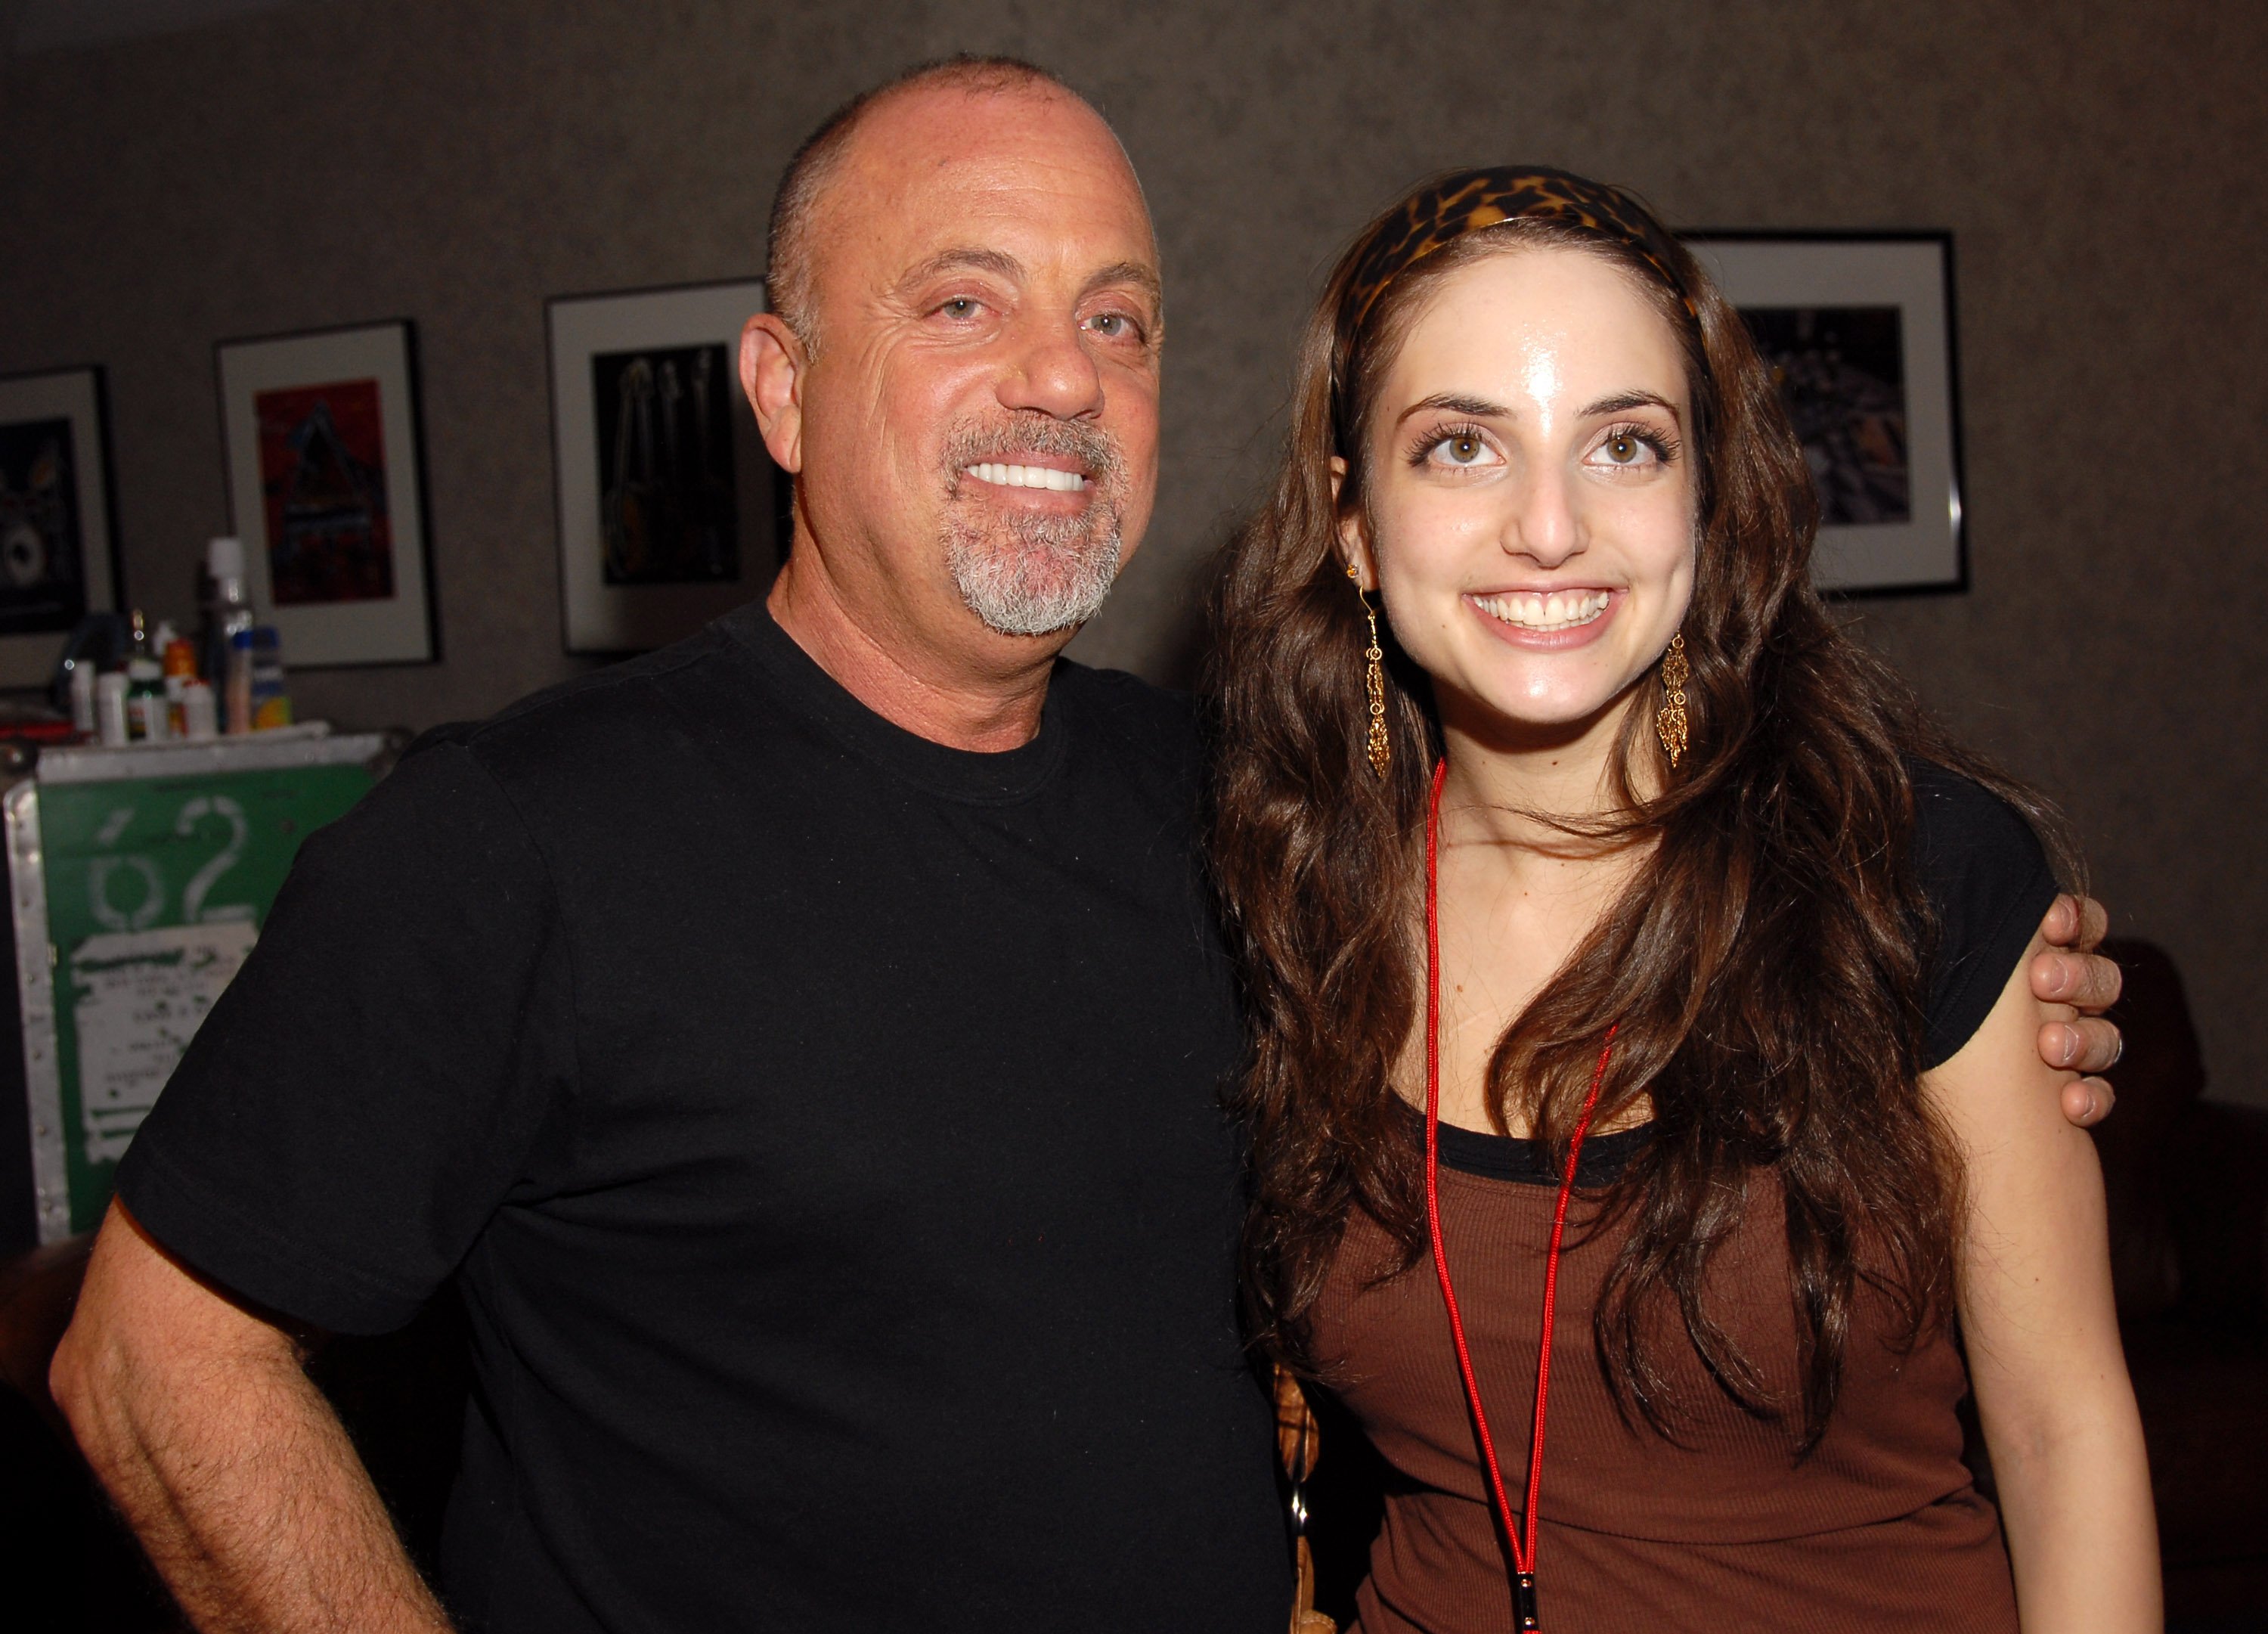 Billy Joel and daughter Alexa Ray Joel during Billy Joel in Concert at Madison Square Garden on April 24, 2006 in New York City, New York. / Source: Getty Images